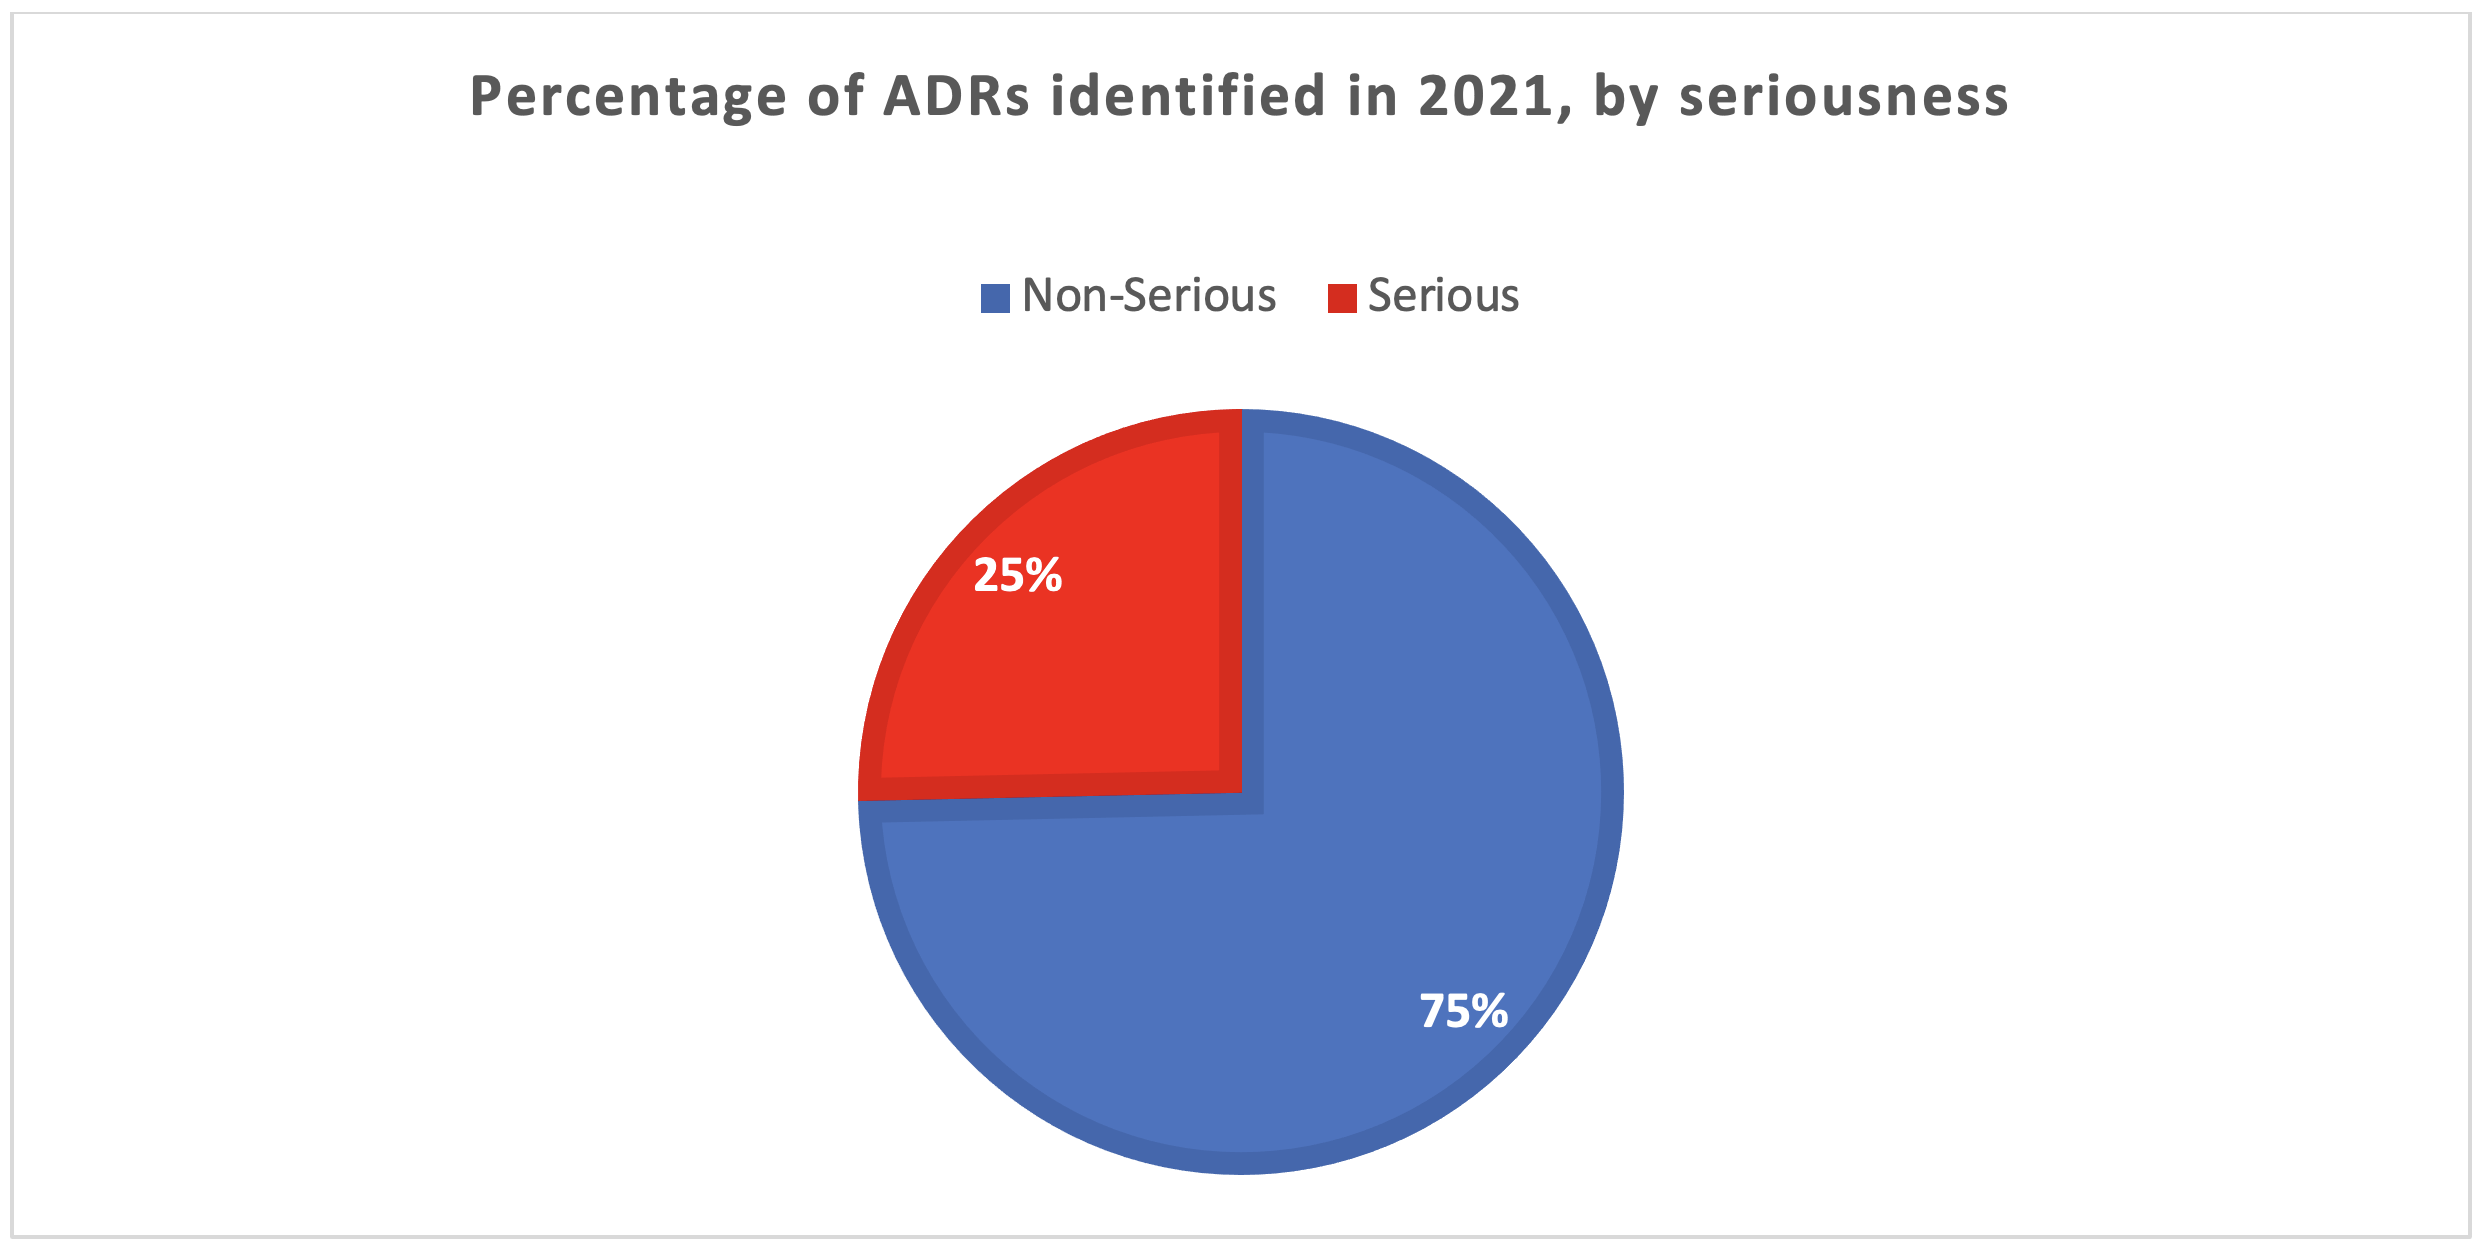 Percentage of ADRs by seriousness